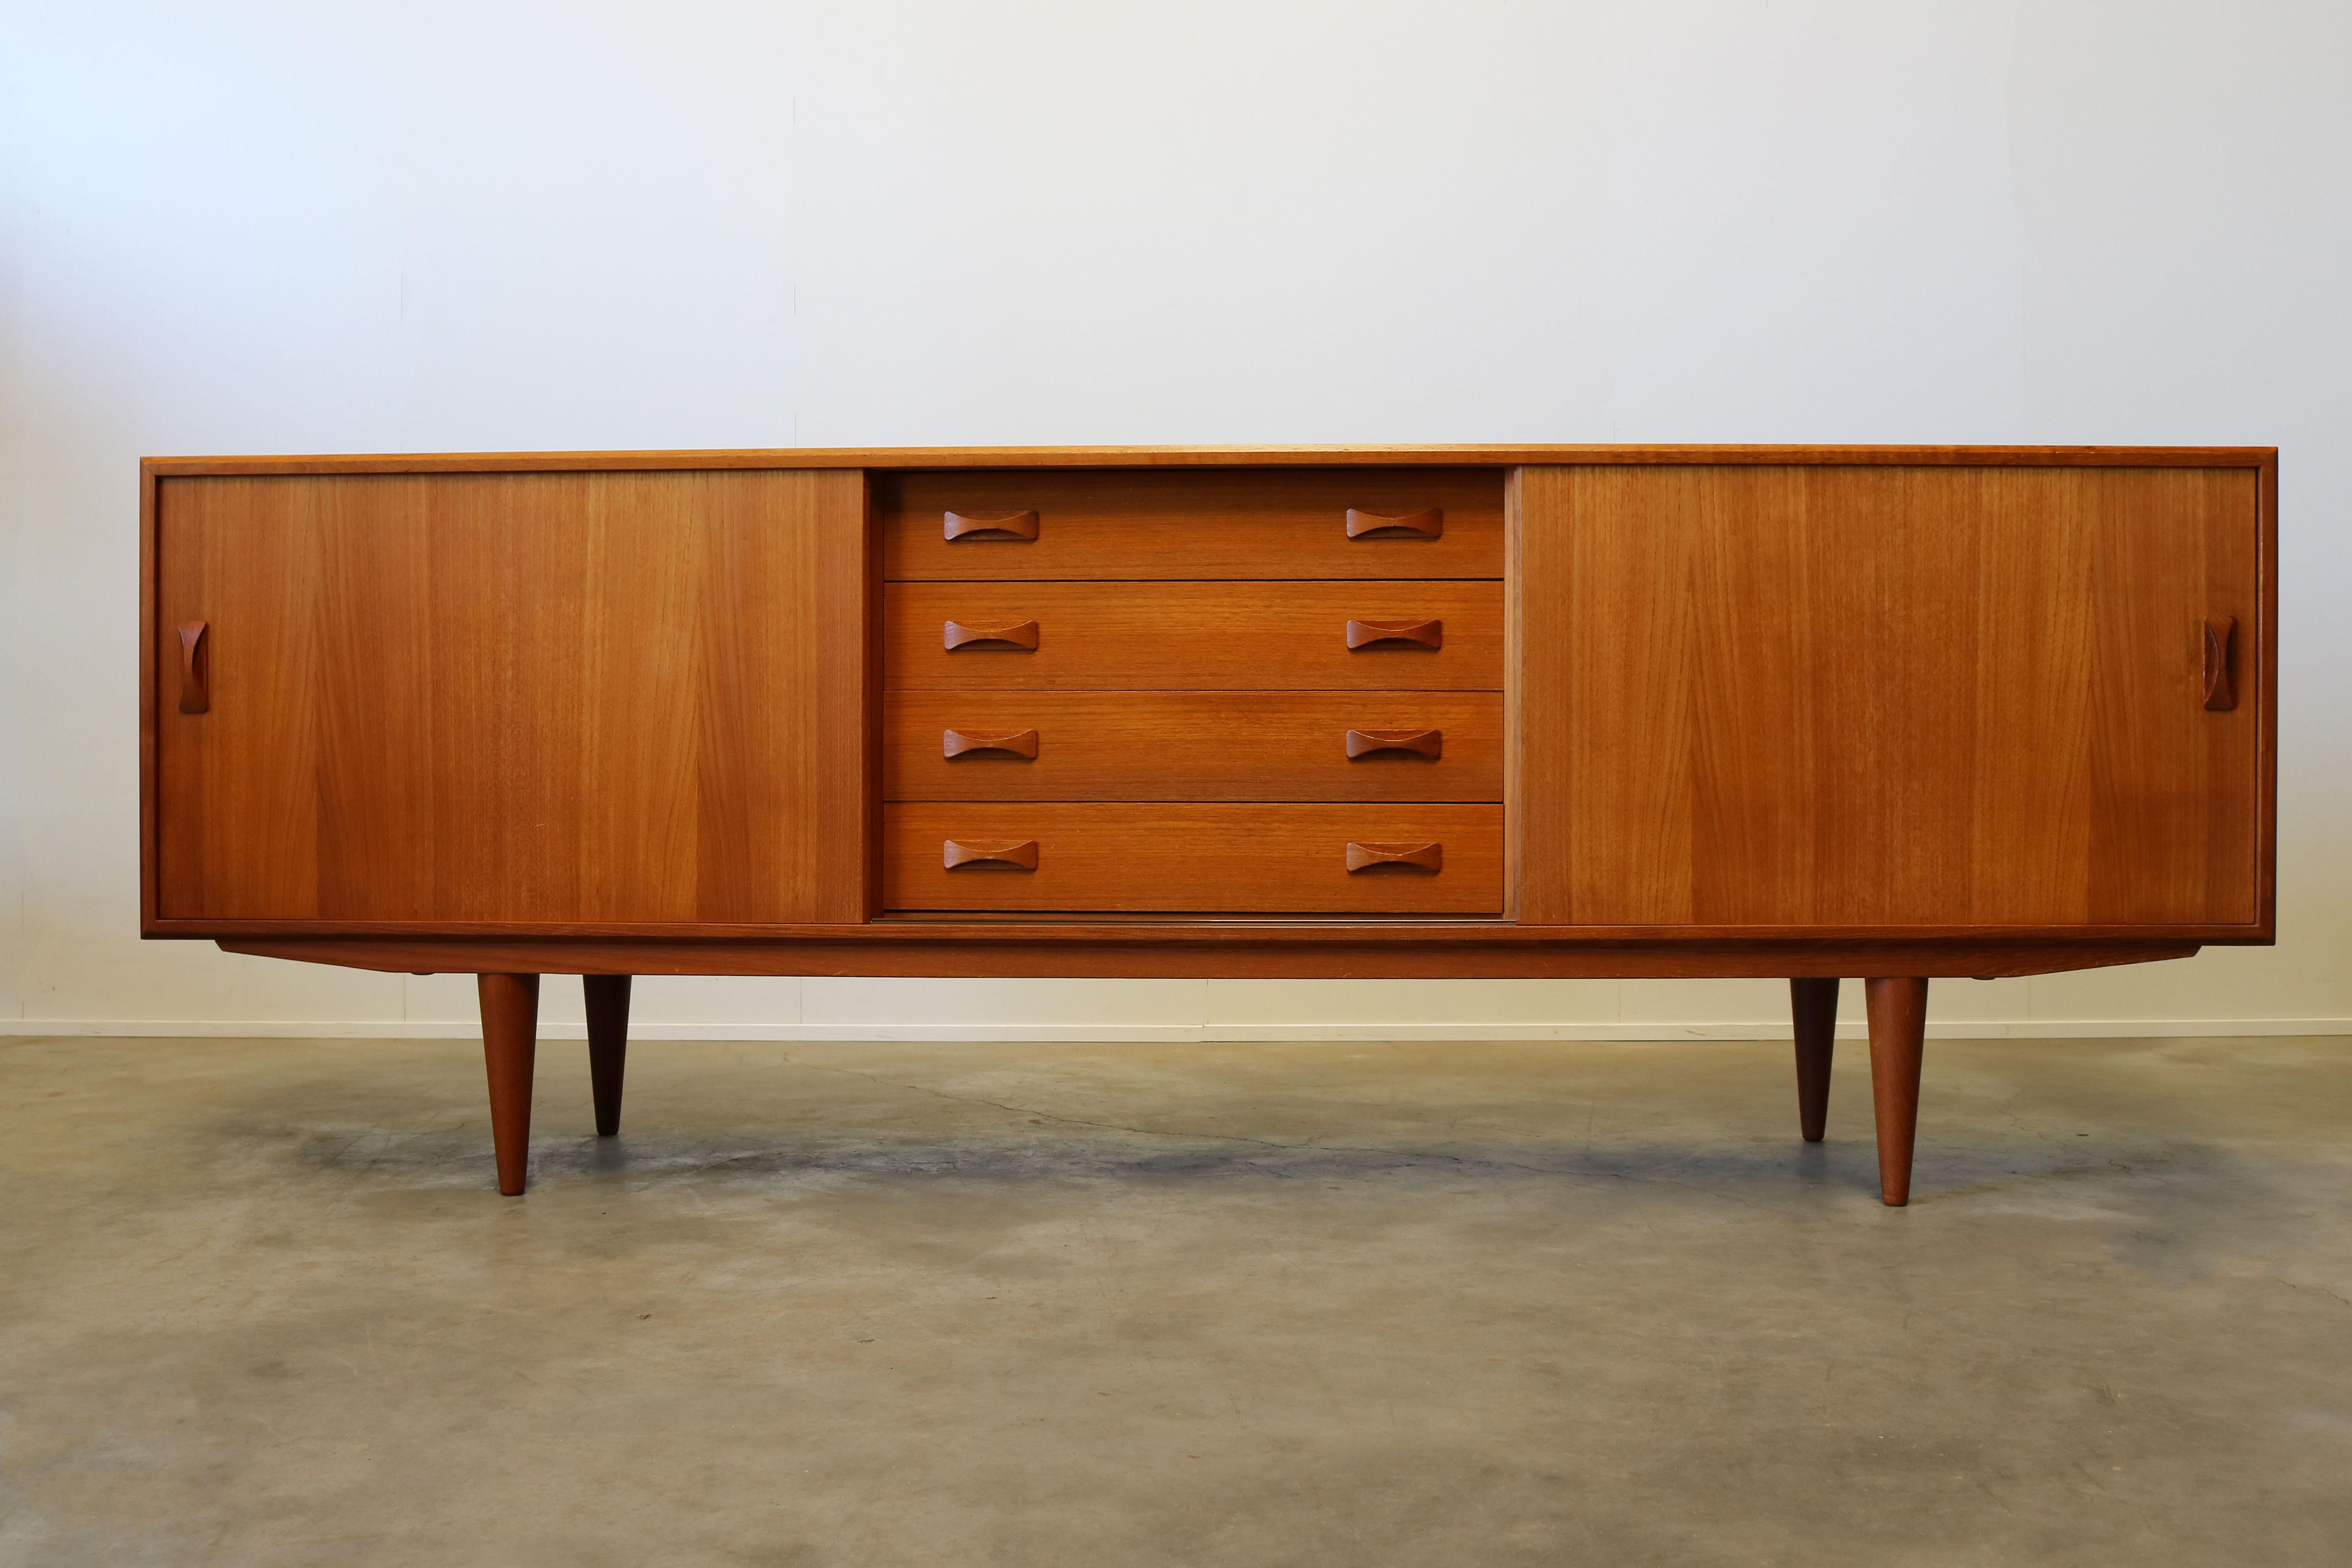 Danish teak sideboard / credenza designed by Clausen & son in the 1960s. Wonderful sculpted handgrips and clean design. The sideboard has four drawers, sliding doors and plenty of storage space. A wonderful example of Danish modern design. Sideboard